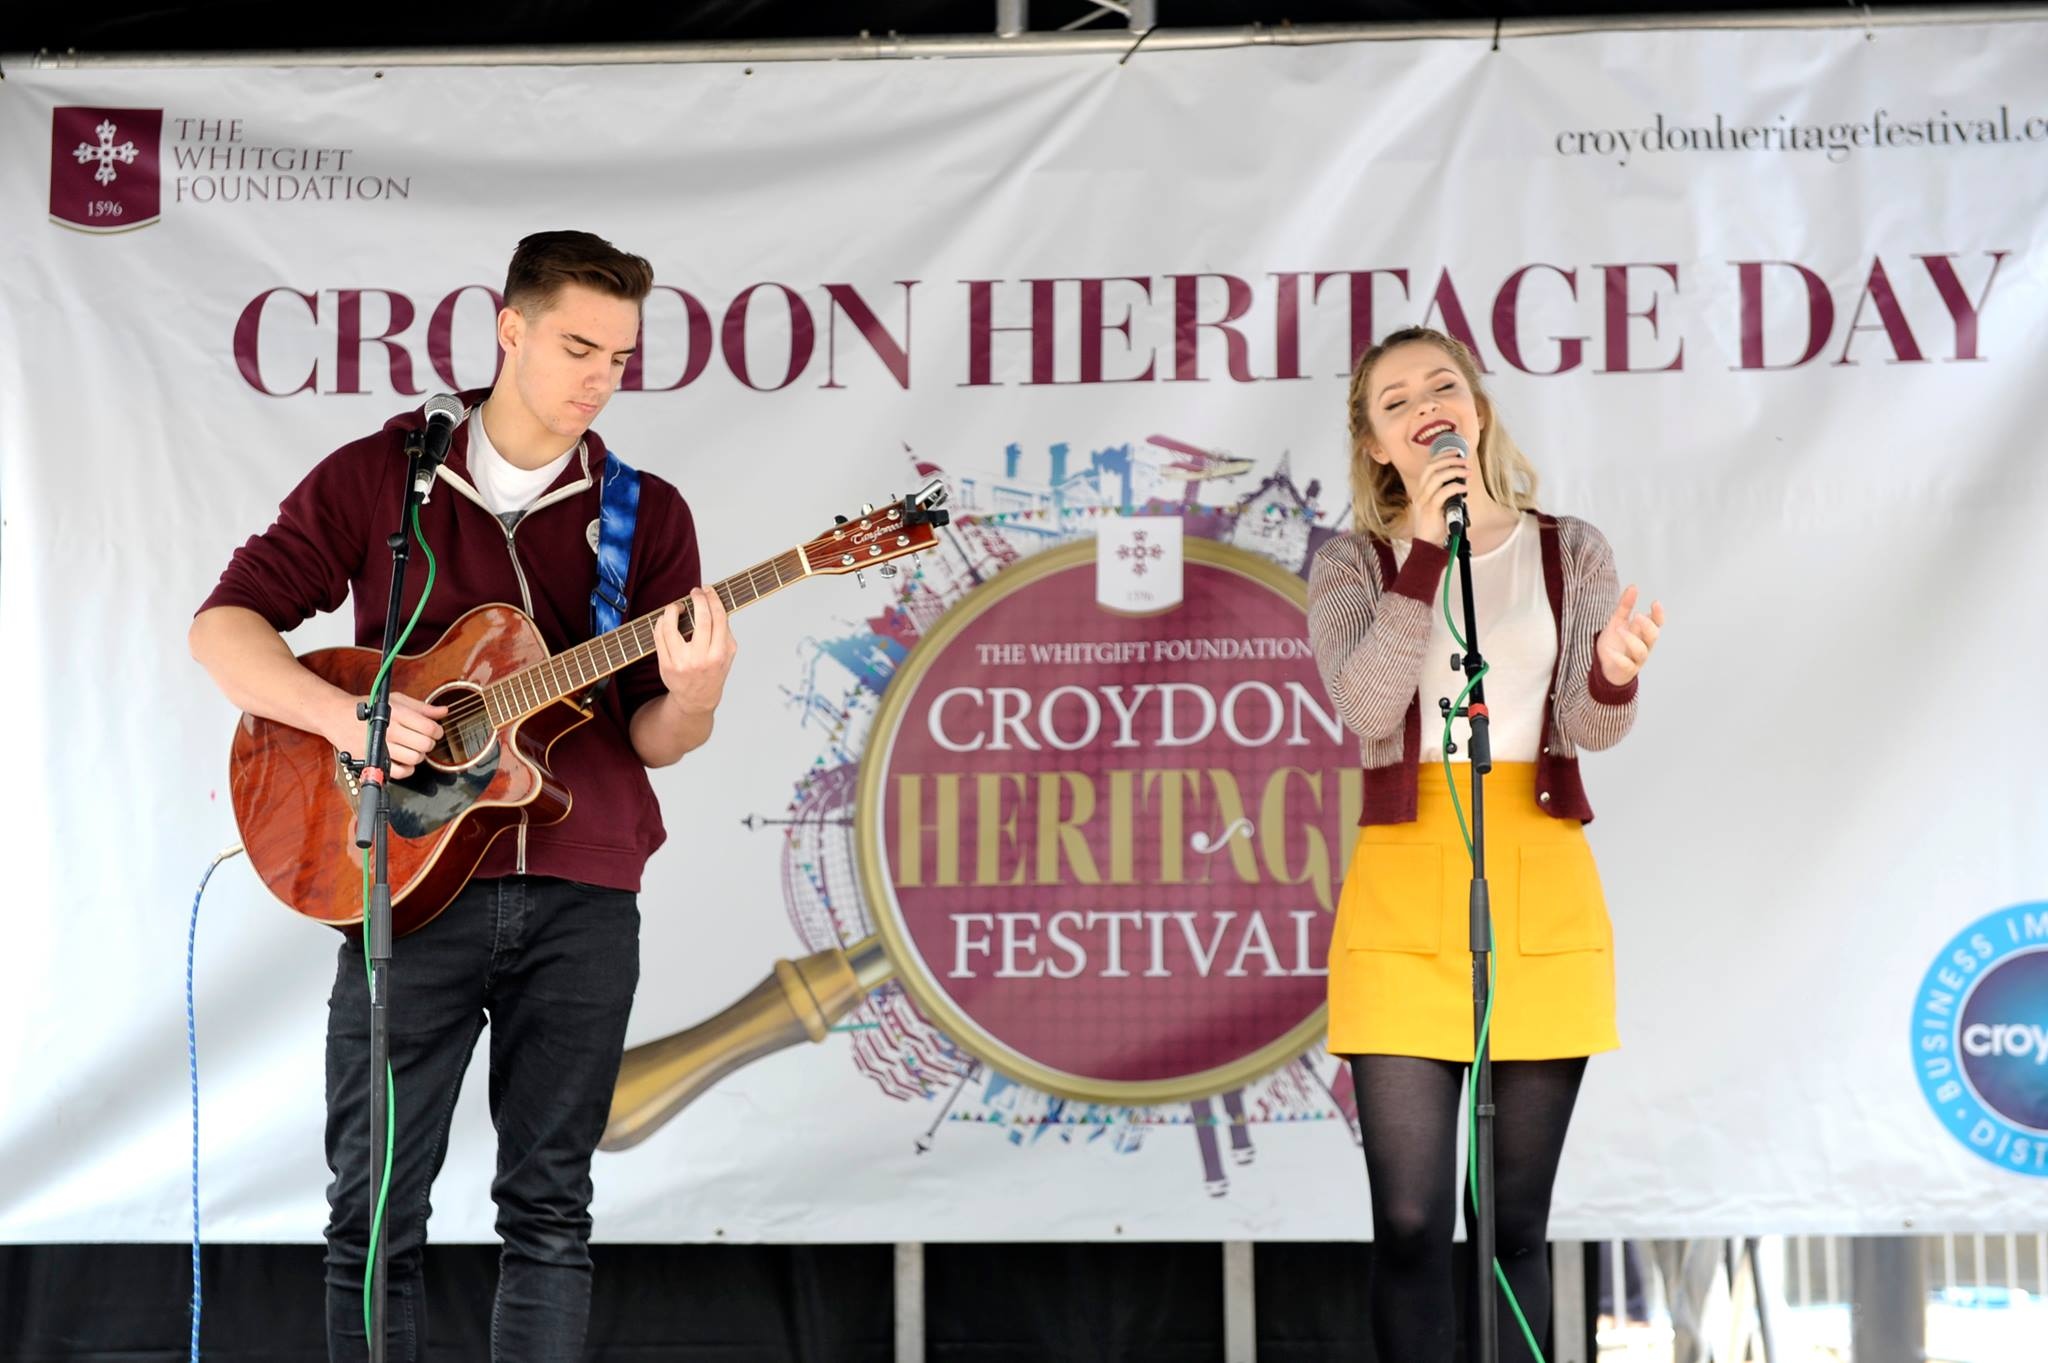 20-facts-about-croydon-heritage-festival